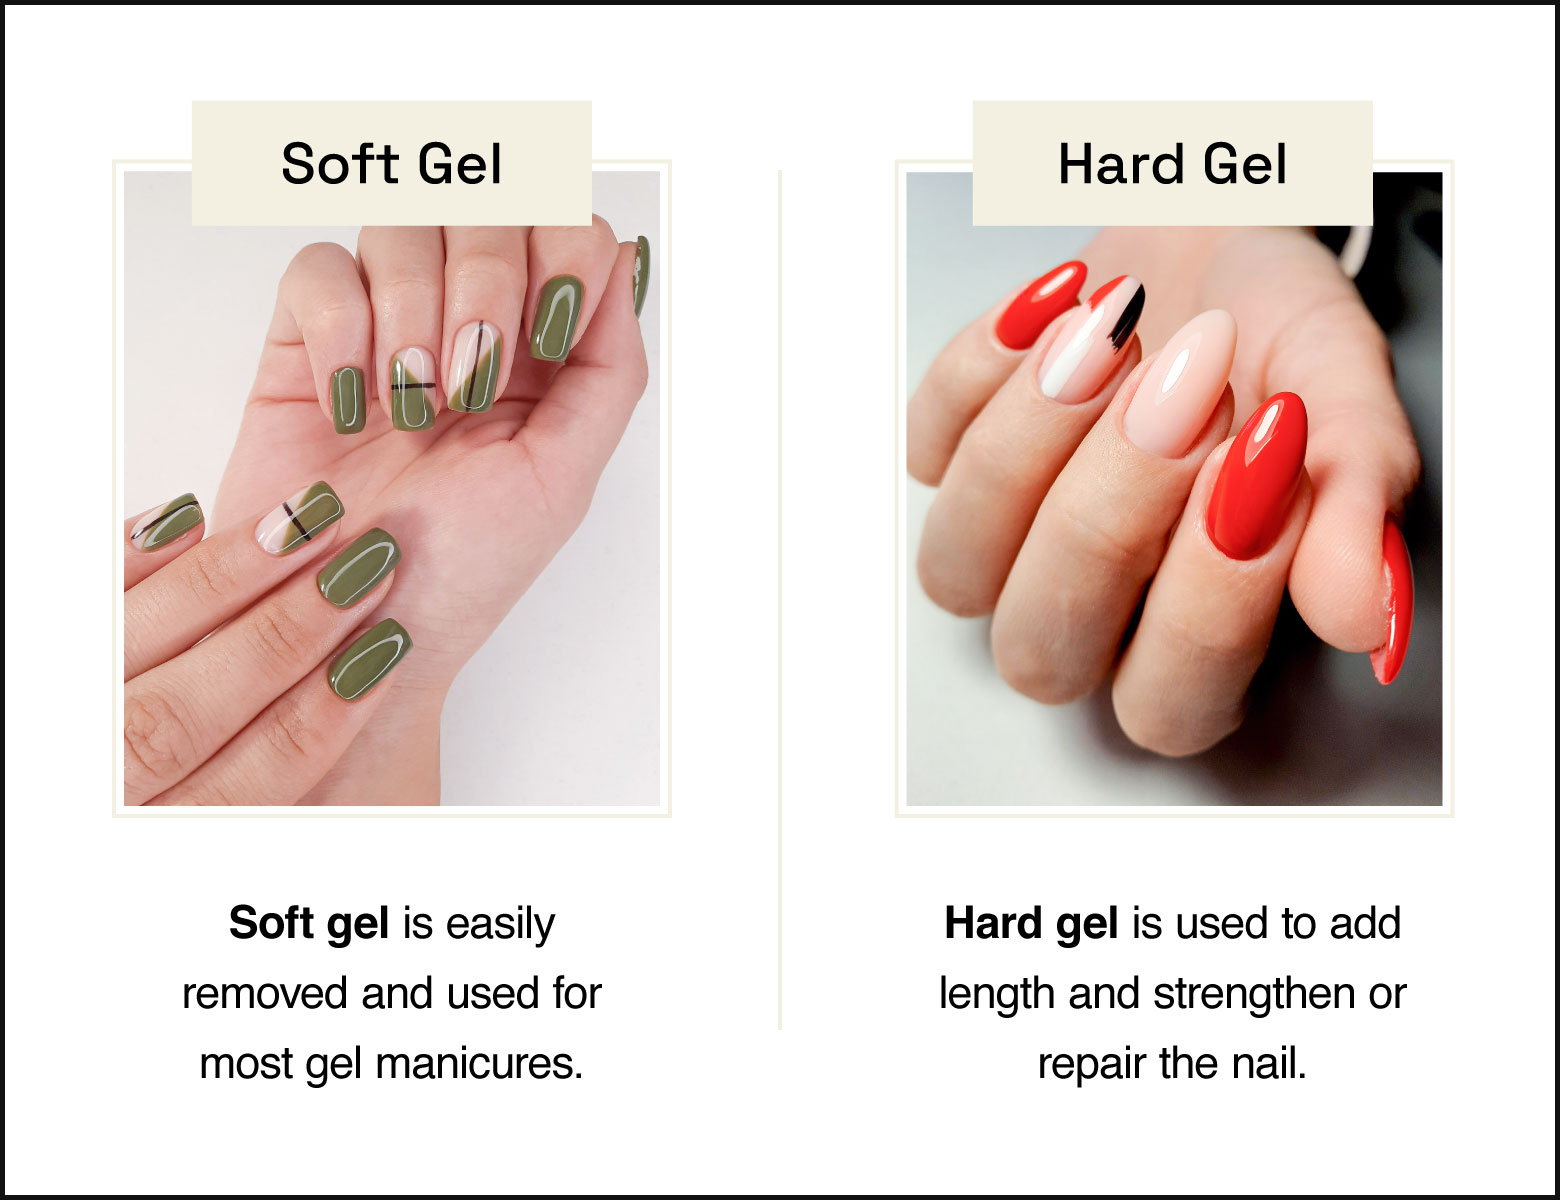 Le Salon Chic - Gel Vs Acrylic Vs Gel Polish What the difference? Clients  often come to us confused about which product is which and often mix up Gel  Polish or 